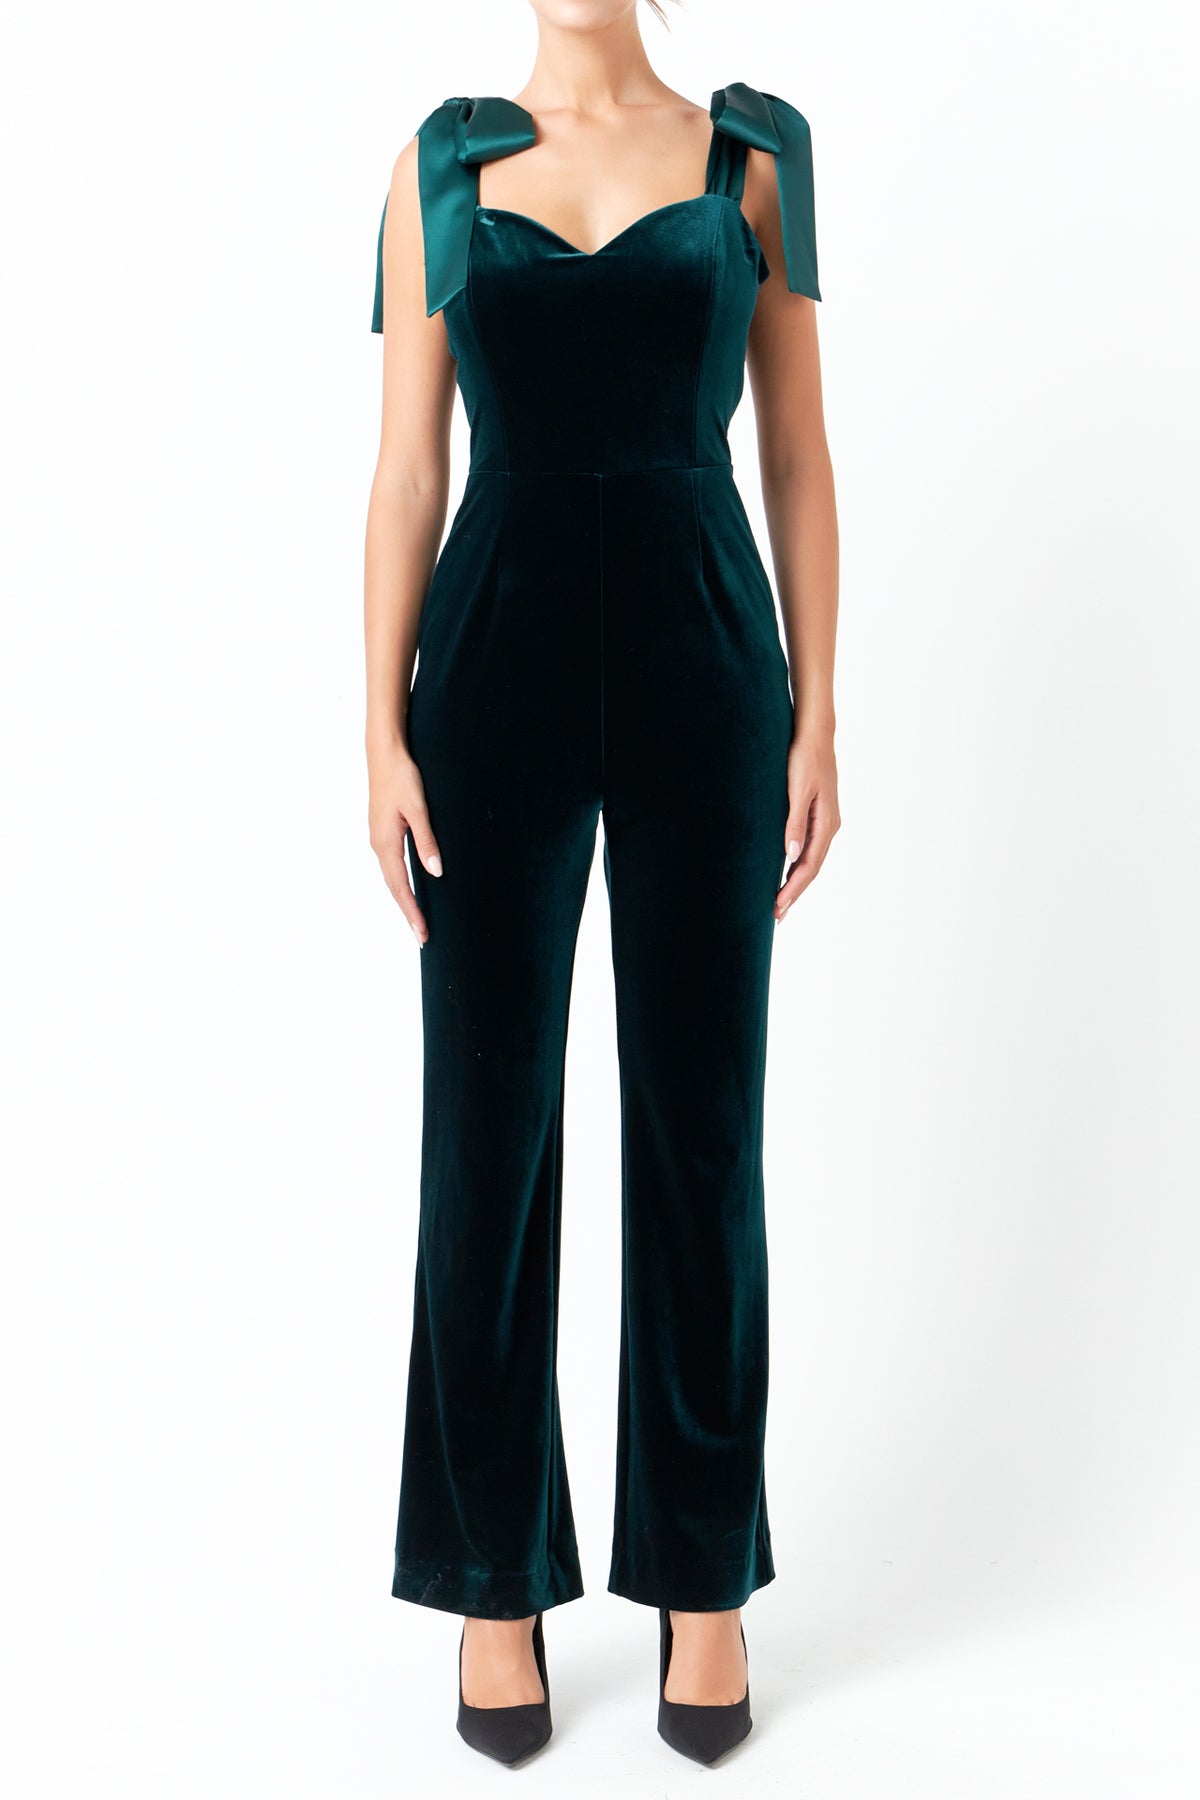 ENDLESS ROSE - Satin Velvet Sweetheart Jumpsuit - JUMPSUITS available at Objectrare